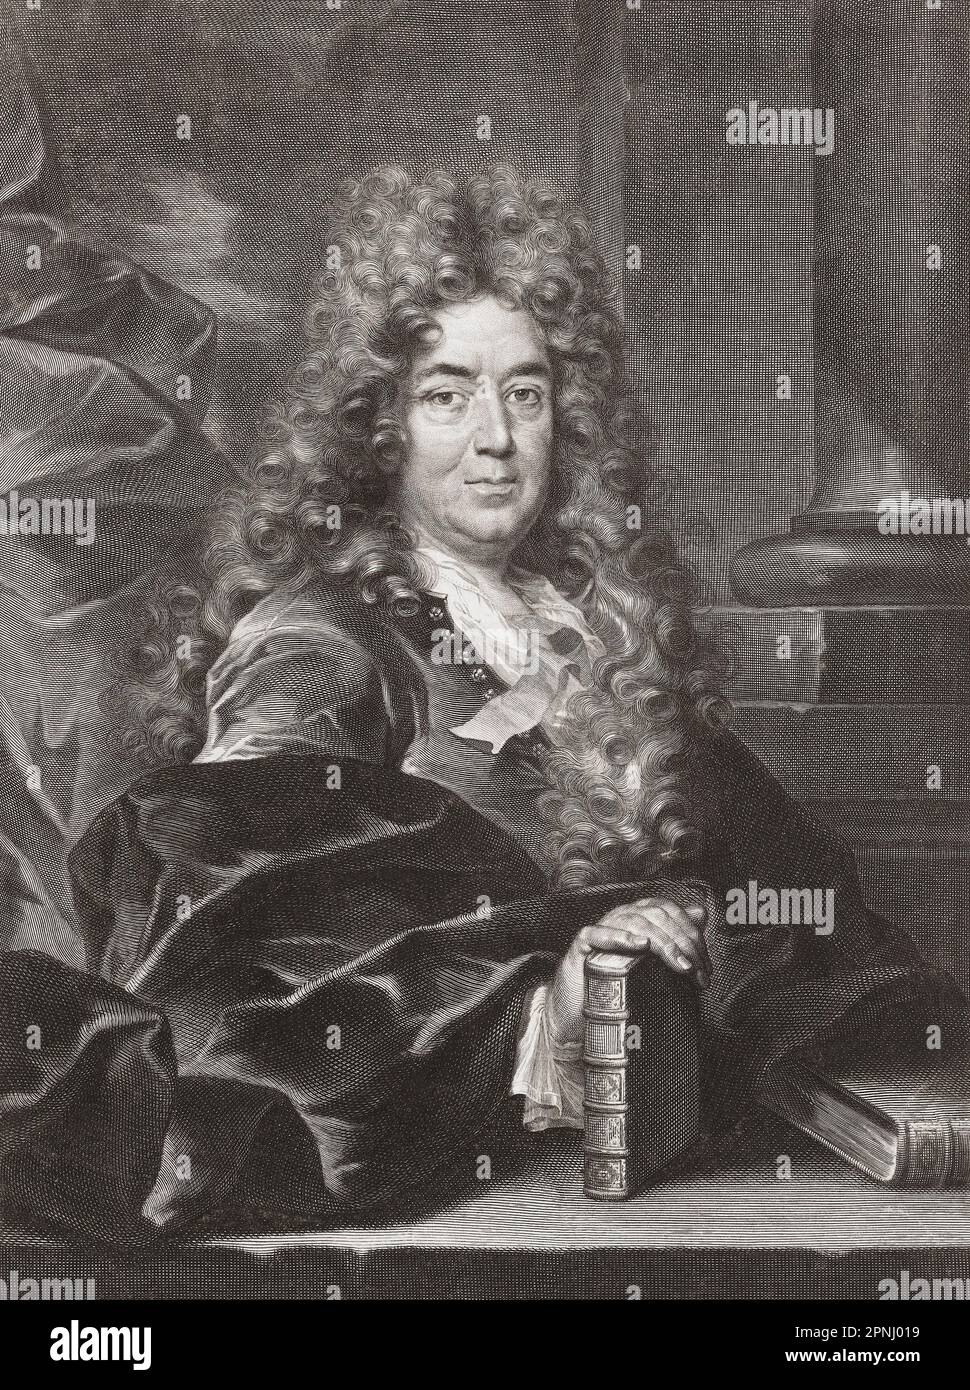 Charles Perrault, 1628 - 1703.  French author best remembered for his fairy tales, which included Sleeping Beauty, Puss in Boots, Little Red Riding Hood.  He was a member of the Académie Française or French Academy.  From a print by Gerard Edelinck after the painting by Jean Tortebat, Stock Photo